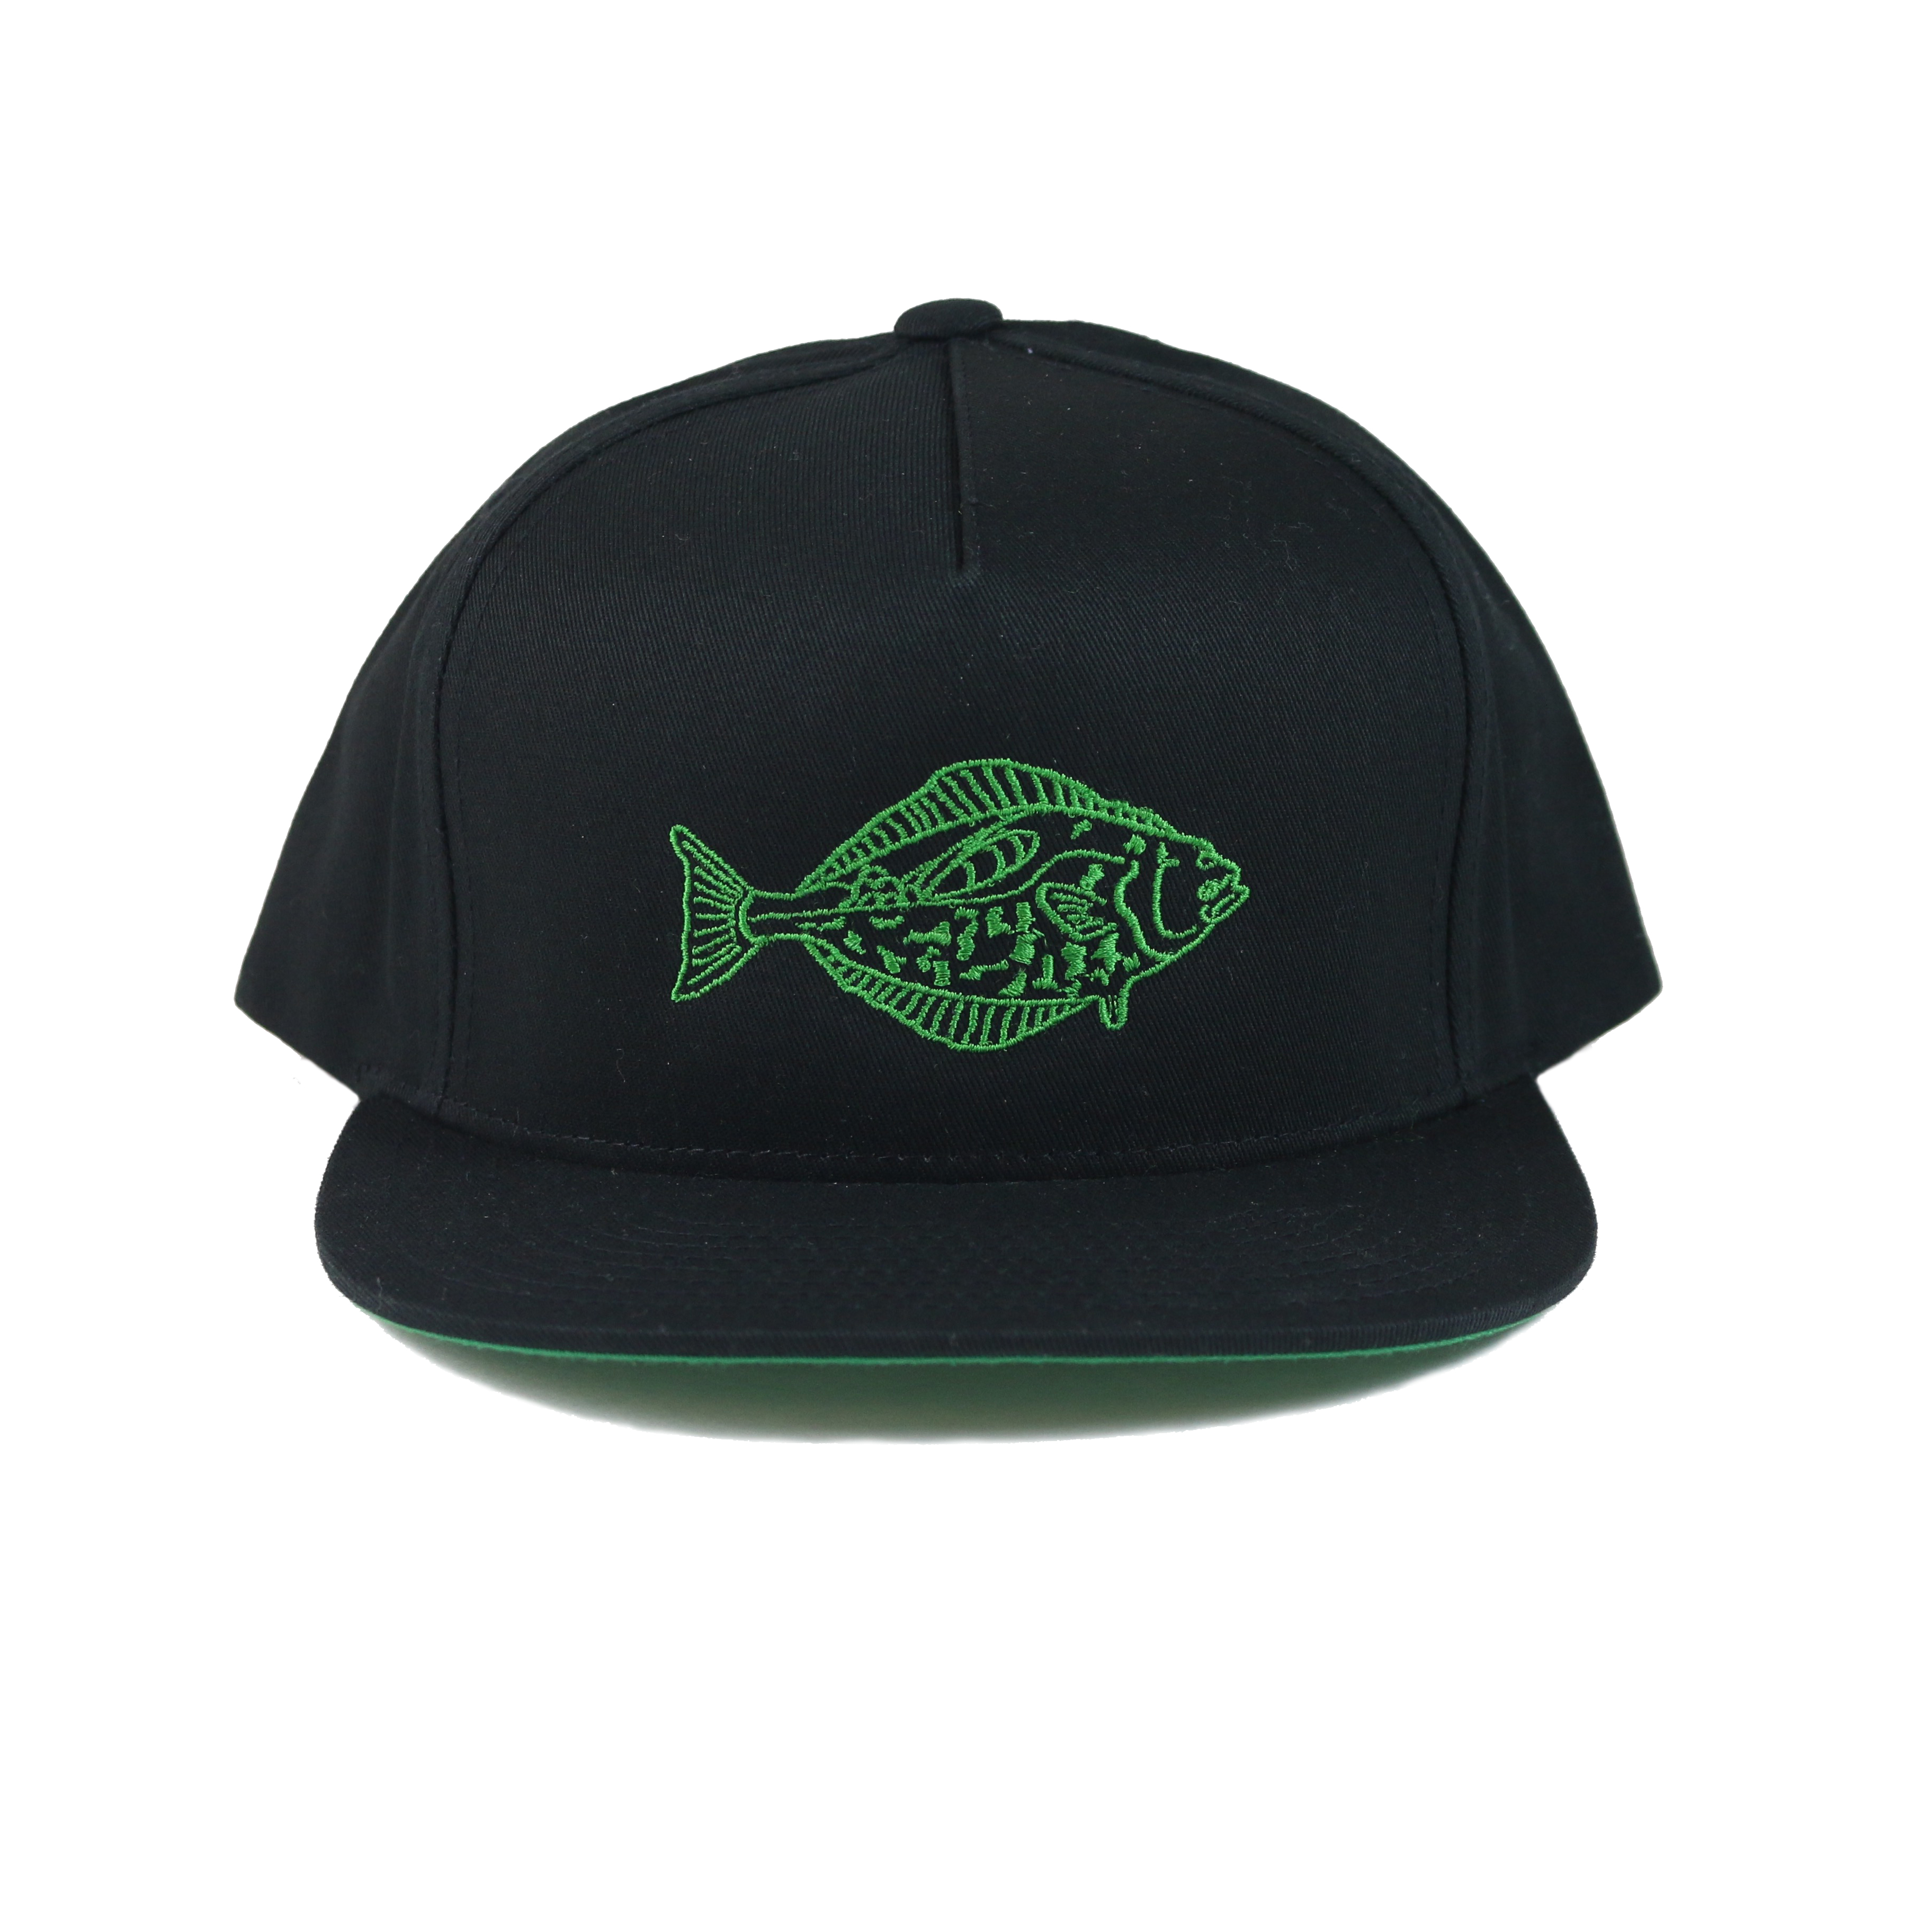 Halibut” 5 Panel Snapback Hat In Black With Green Embroidery » ASC